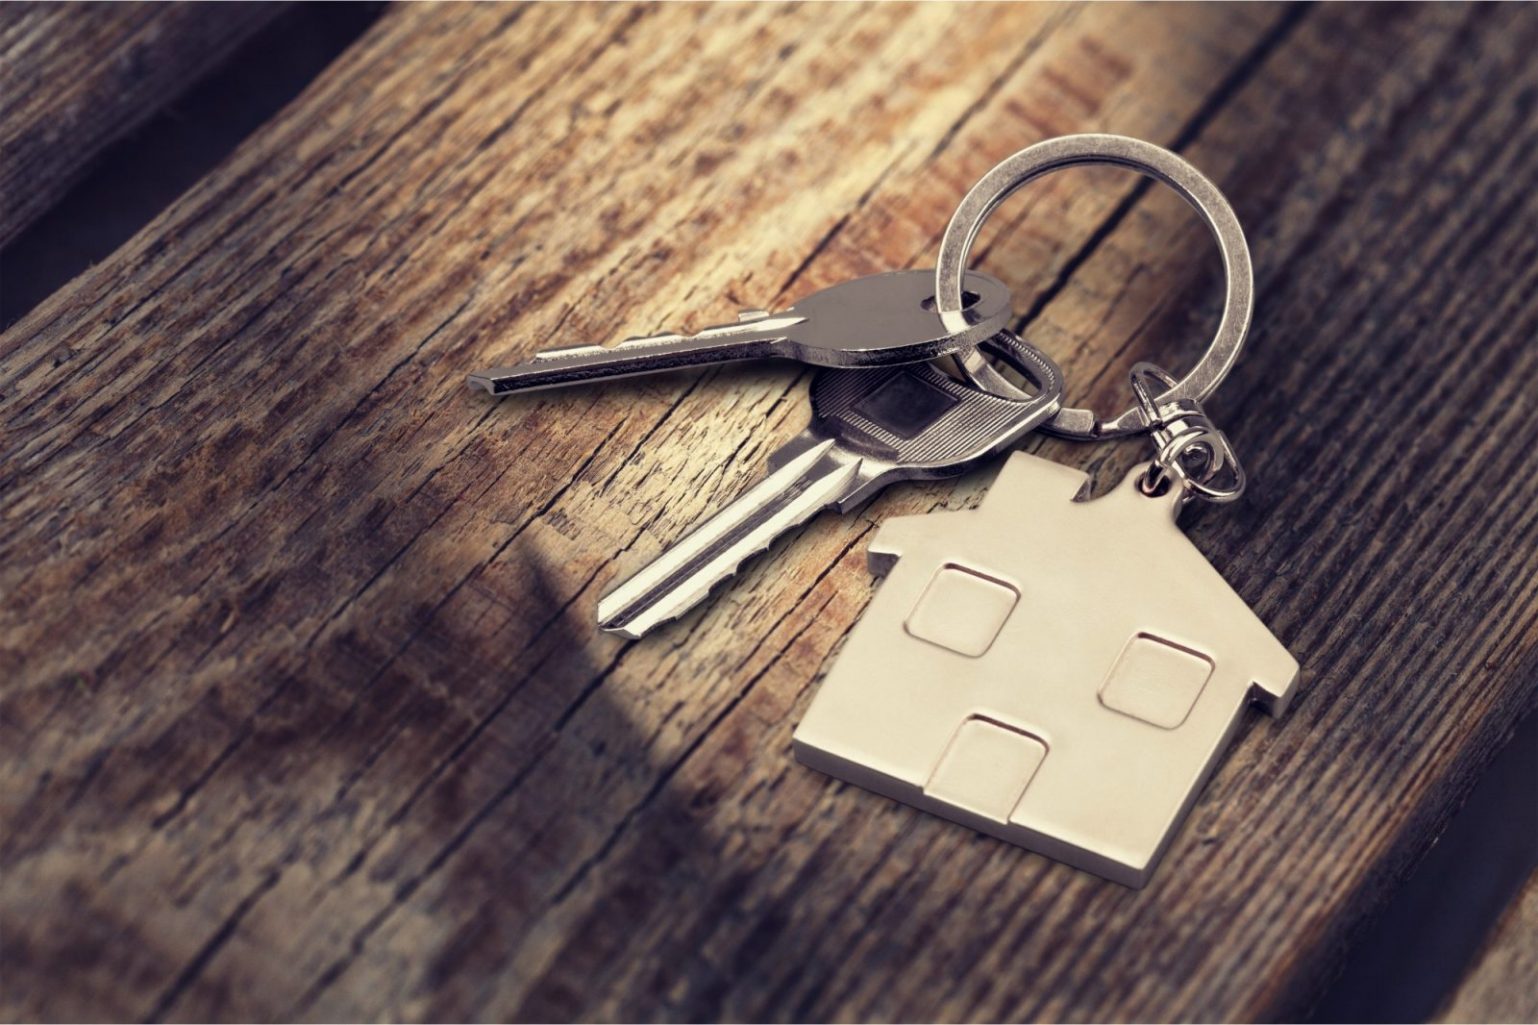 Buying a Property? Do These 9 Items Before the Real Estate Closing